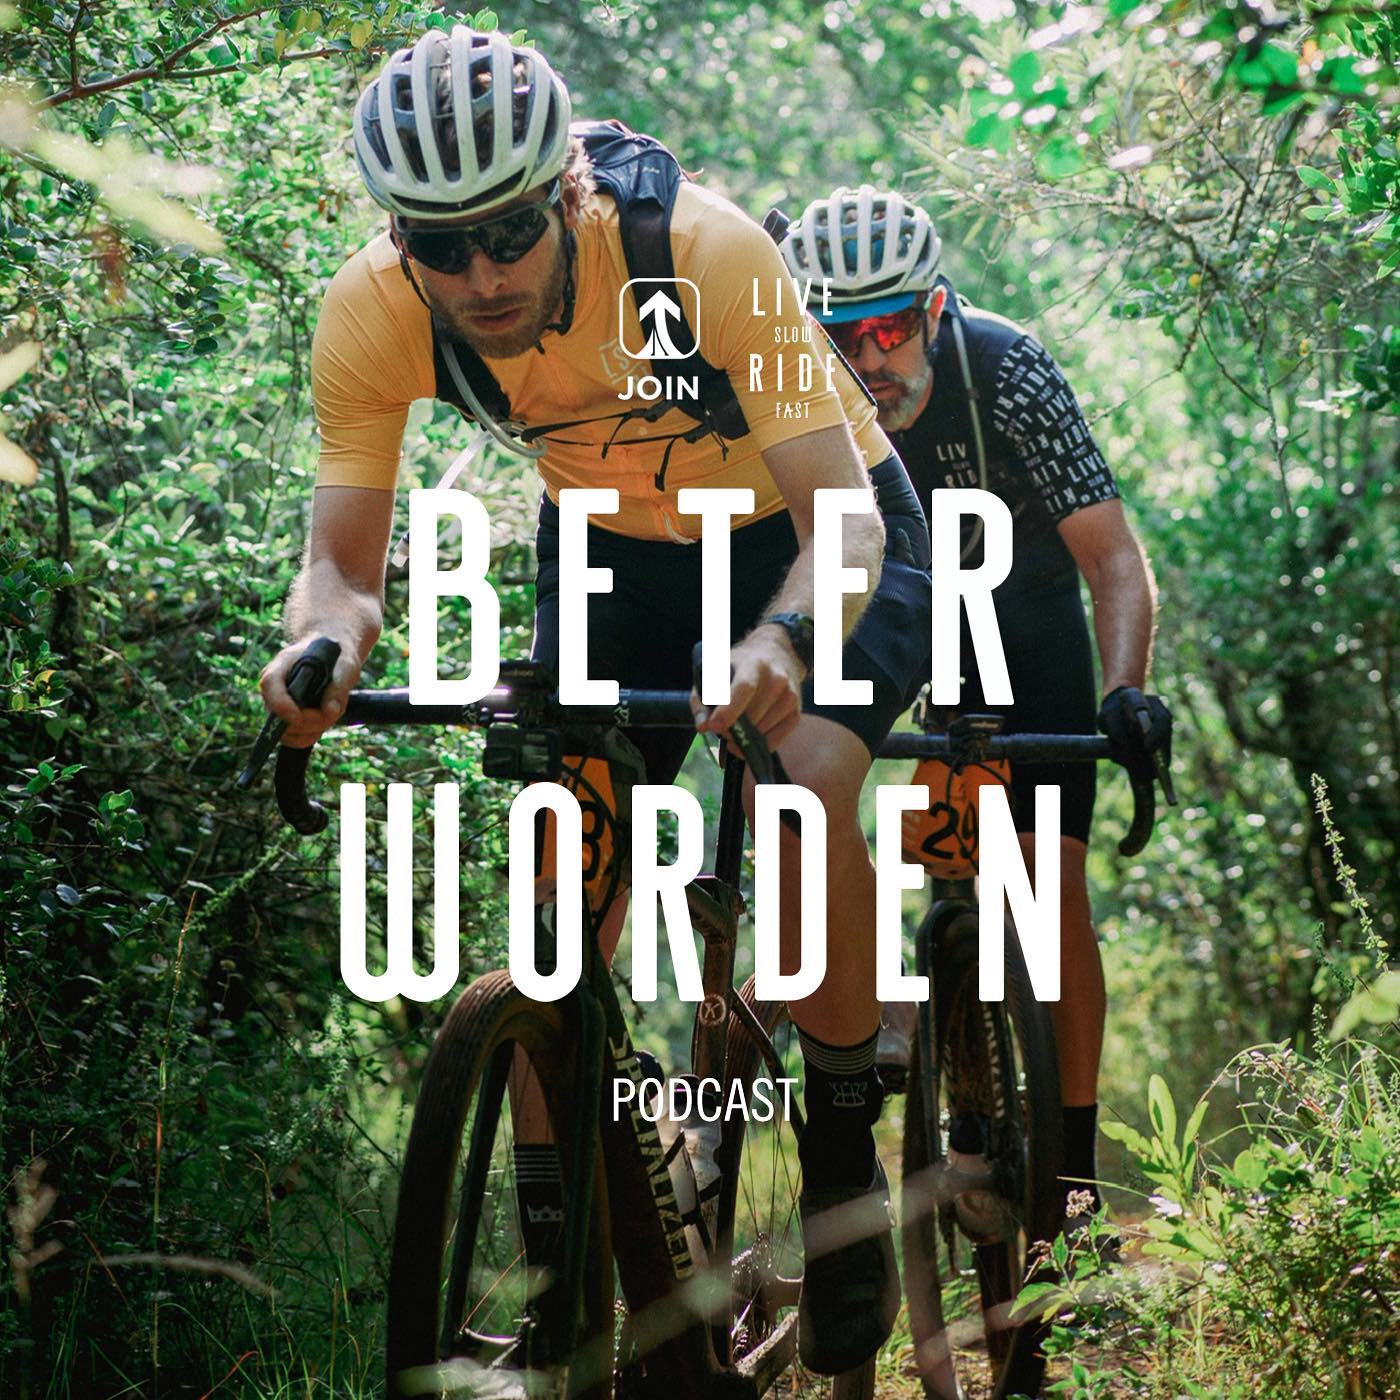 Beter Worden Podcast 64 - JOIN Cycling